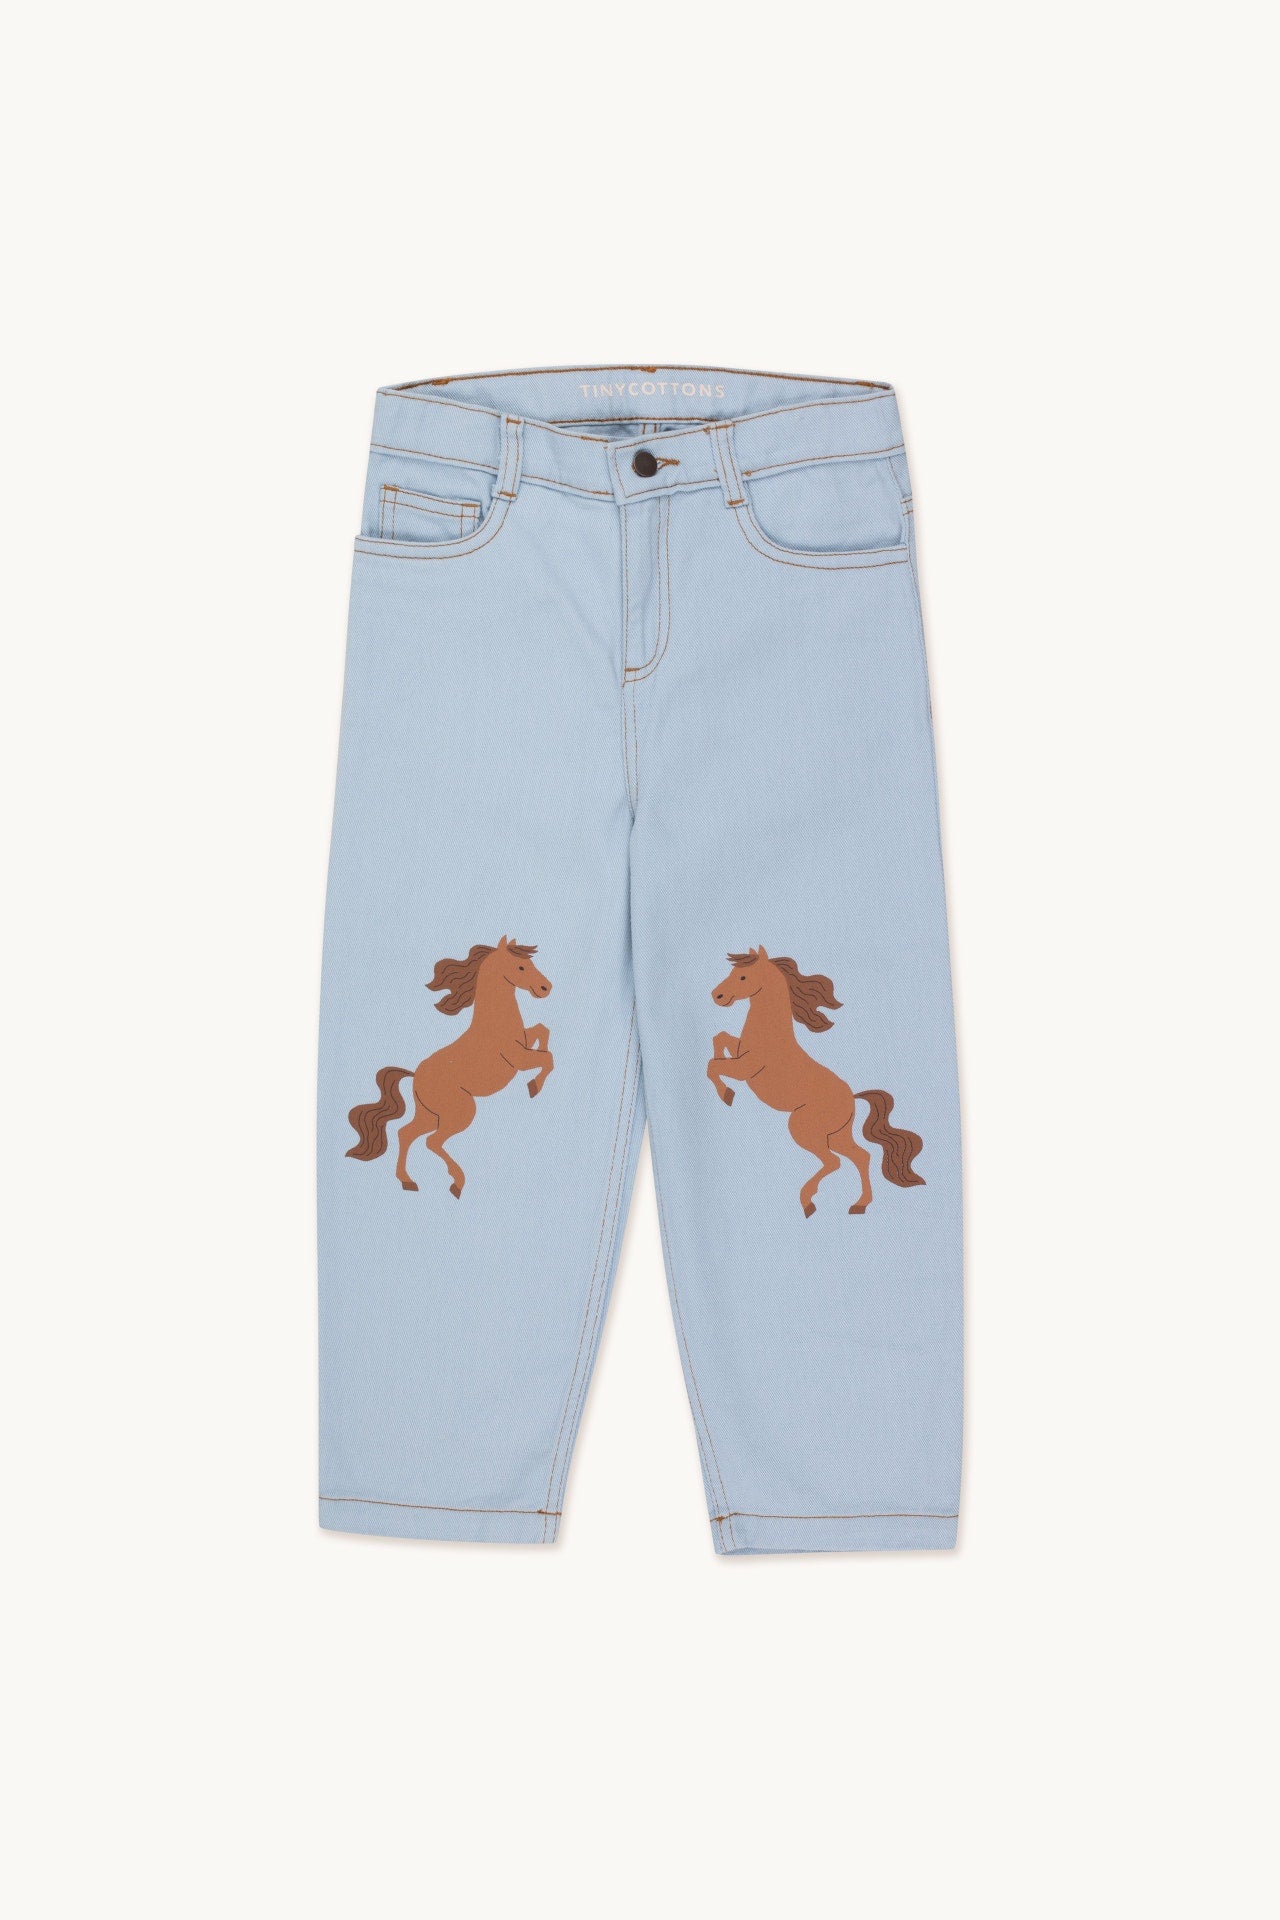 Horses Baggy Jeans